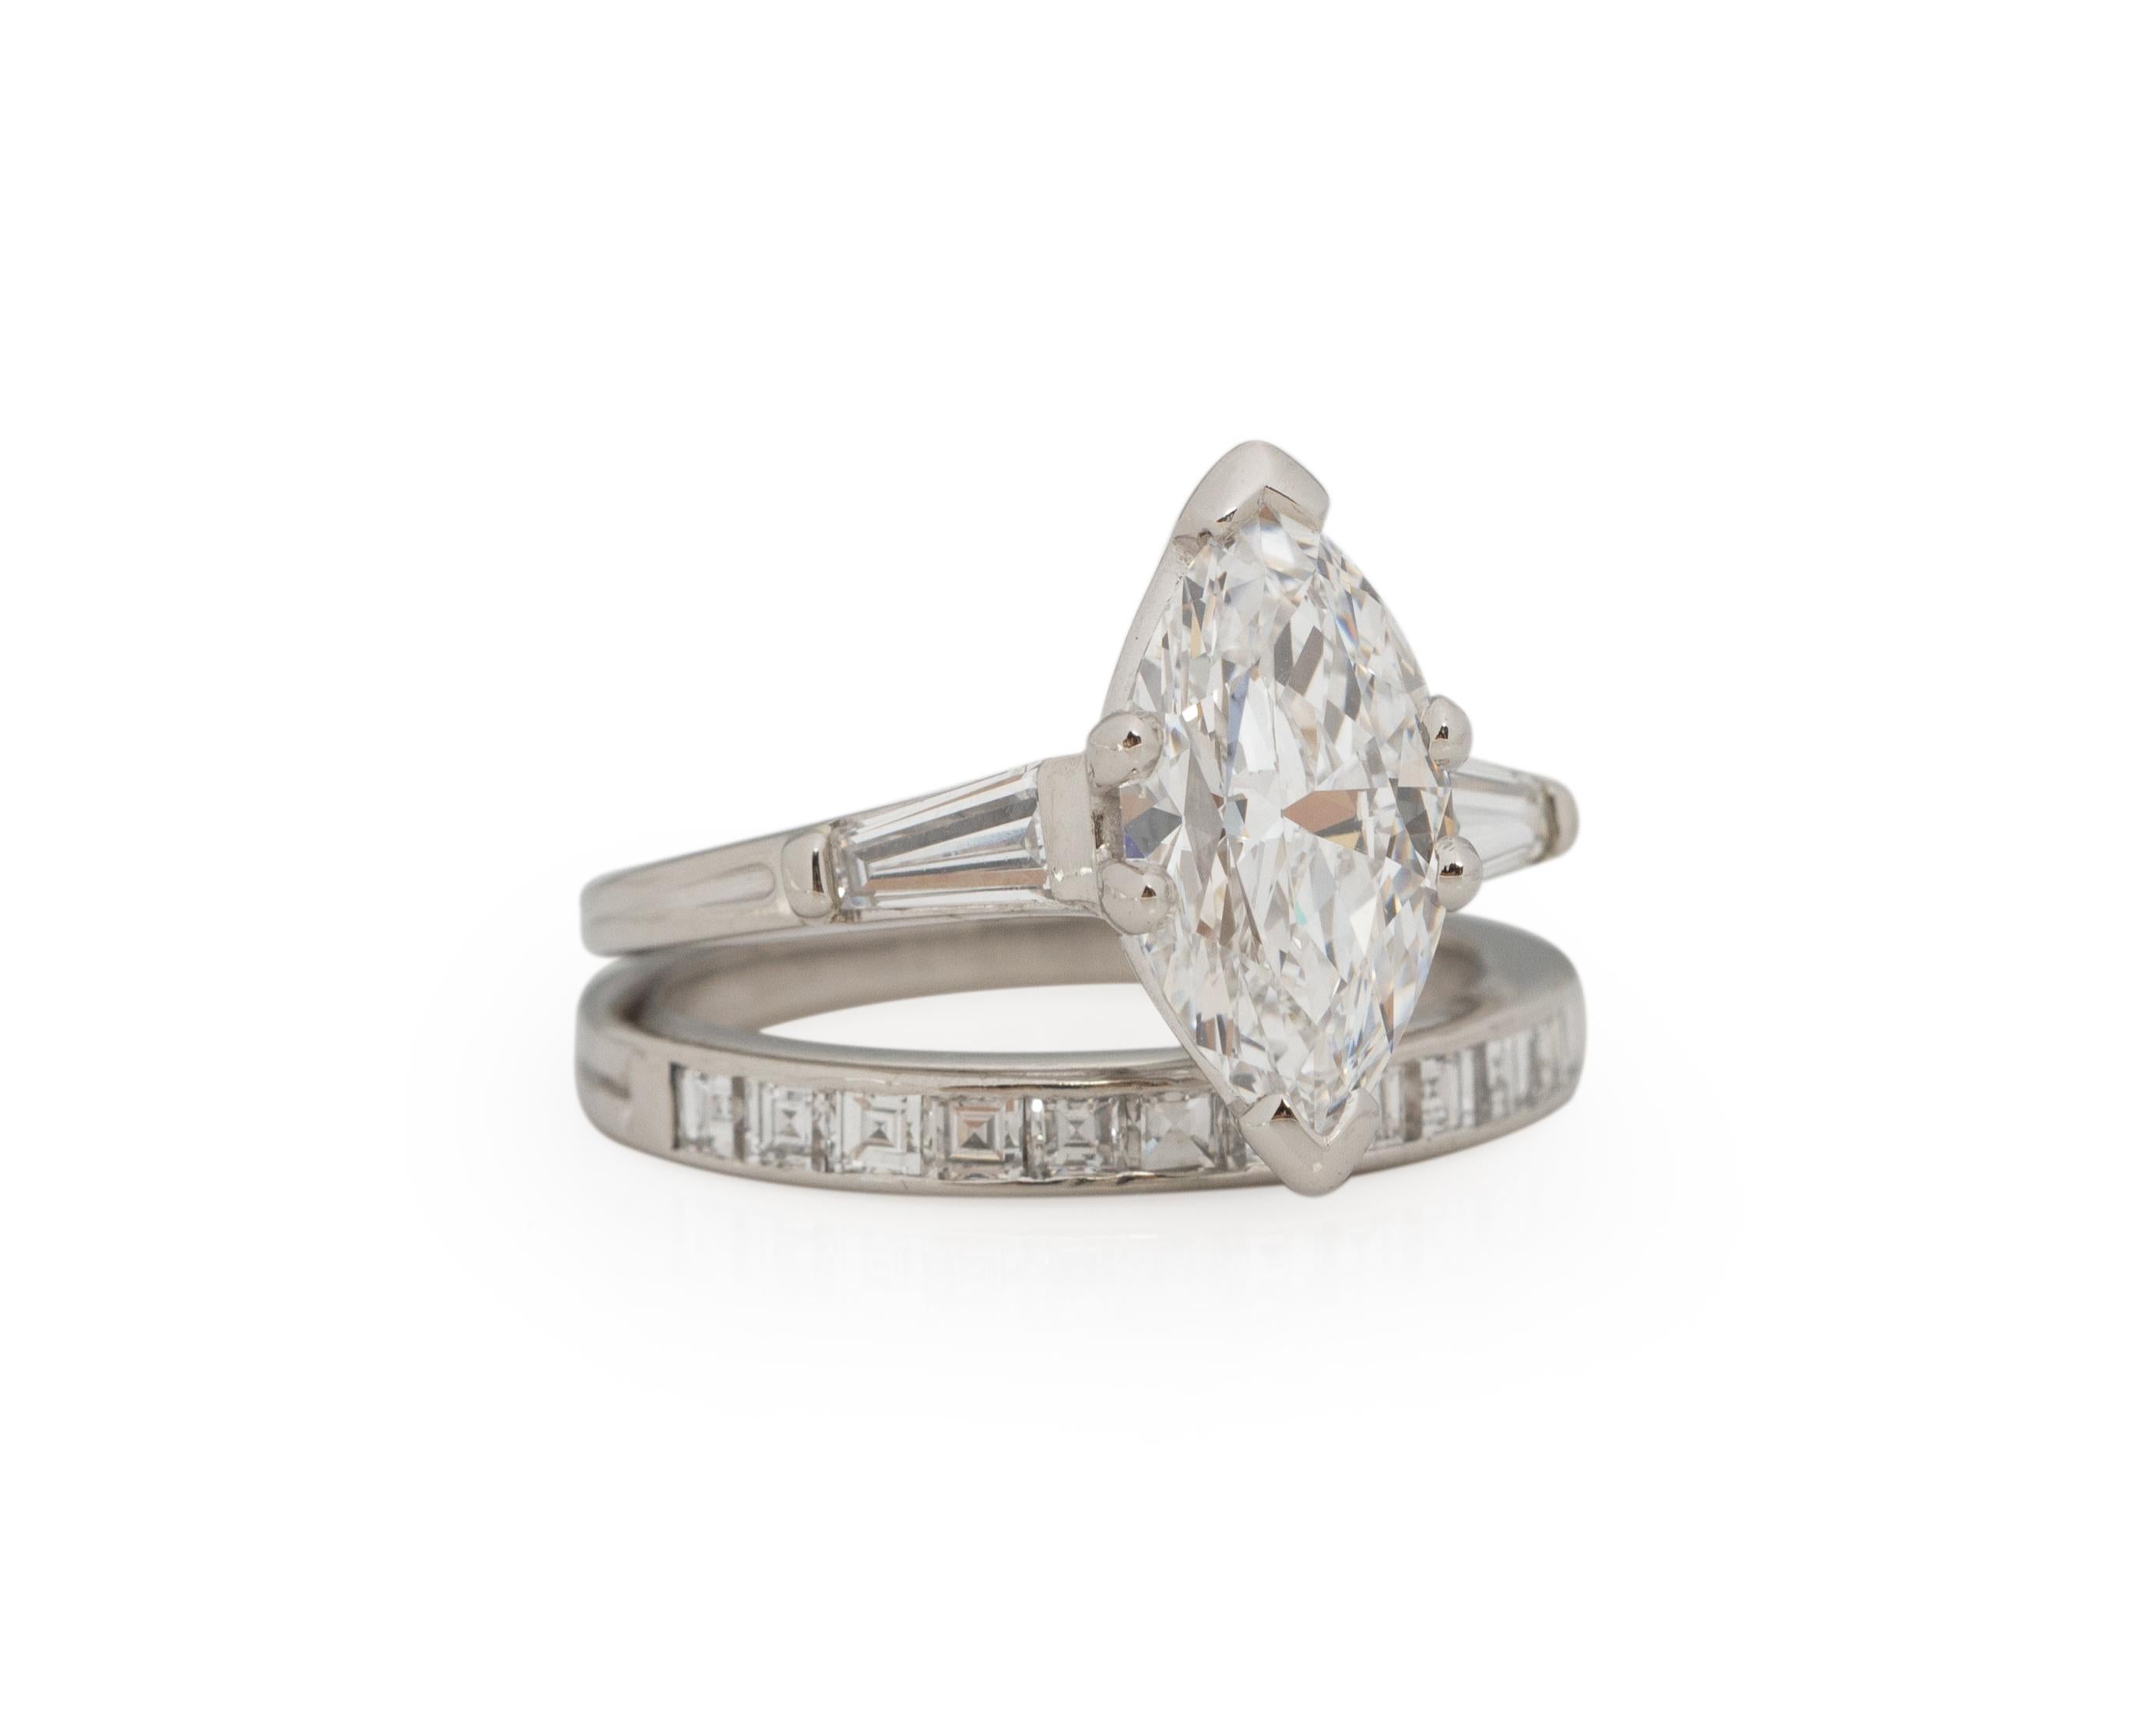 Ring Size: 6.5
Metal Type: Platinum [Hallmarked, and Tested]
Weight: 7 grams

Center Diamond Details:
TIFFANY REPORT# 565536
Weight: 1.78ct
Cut: Vintage Marquise
Color: D
Clarity: VVS1
Measurements: mm

Side Stone Details:
Weight: .33ct
Cut: Tapered